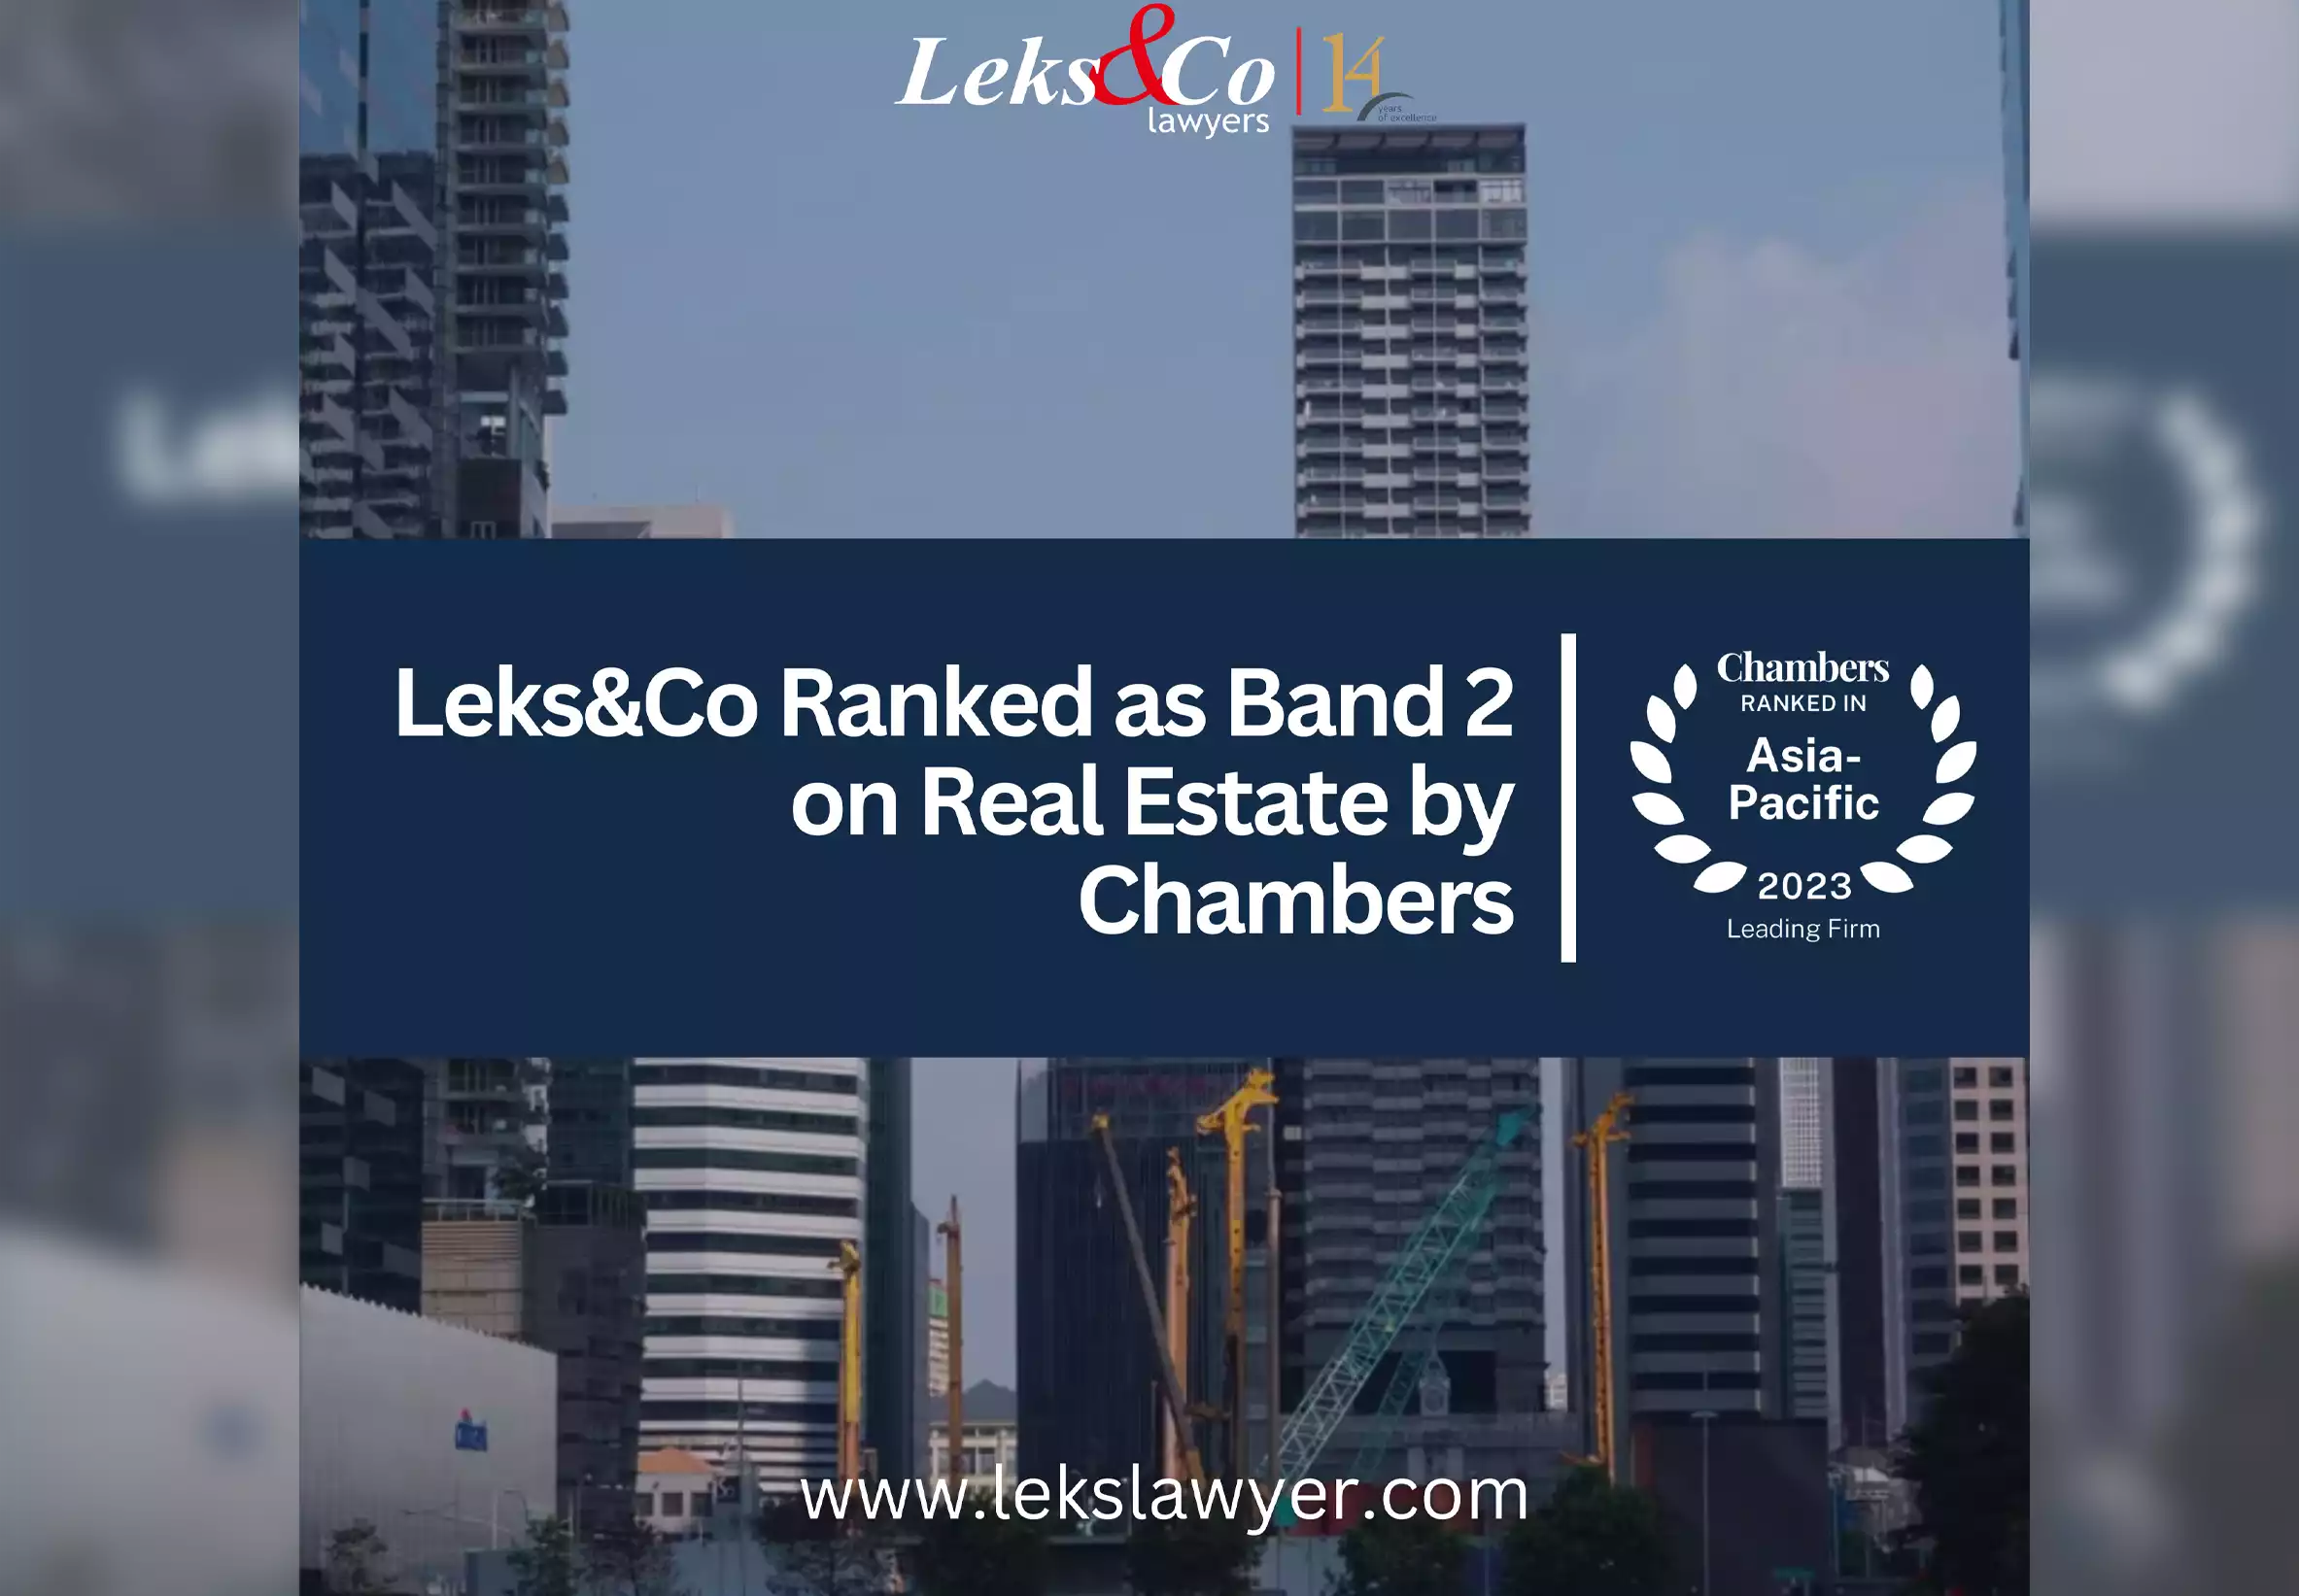 Leks&Co Ranked as Band 2 on Real Estate by Chambers